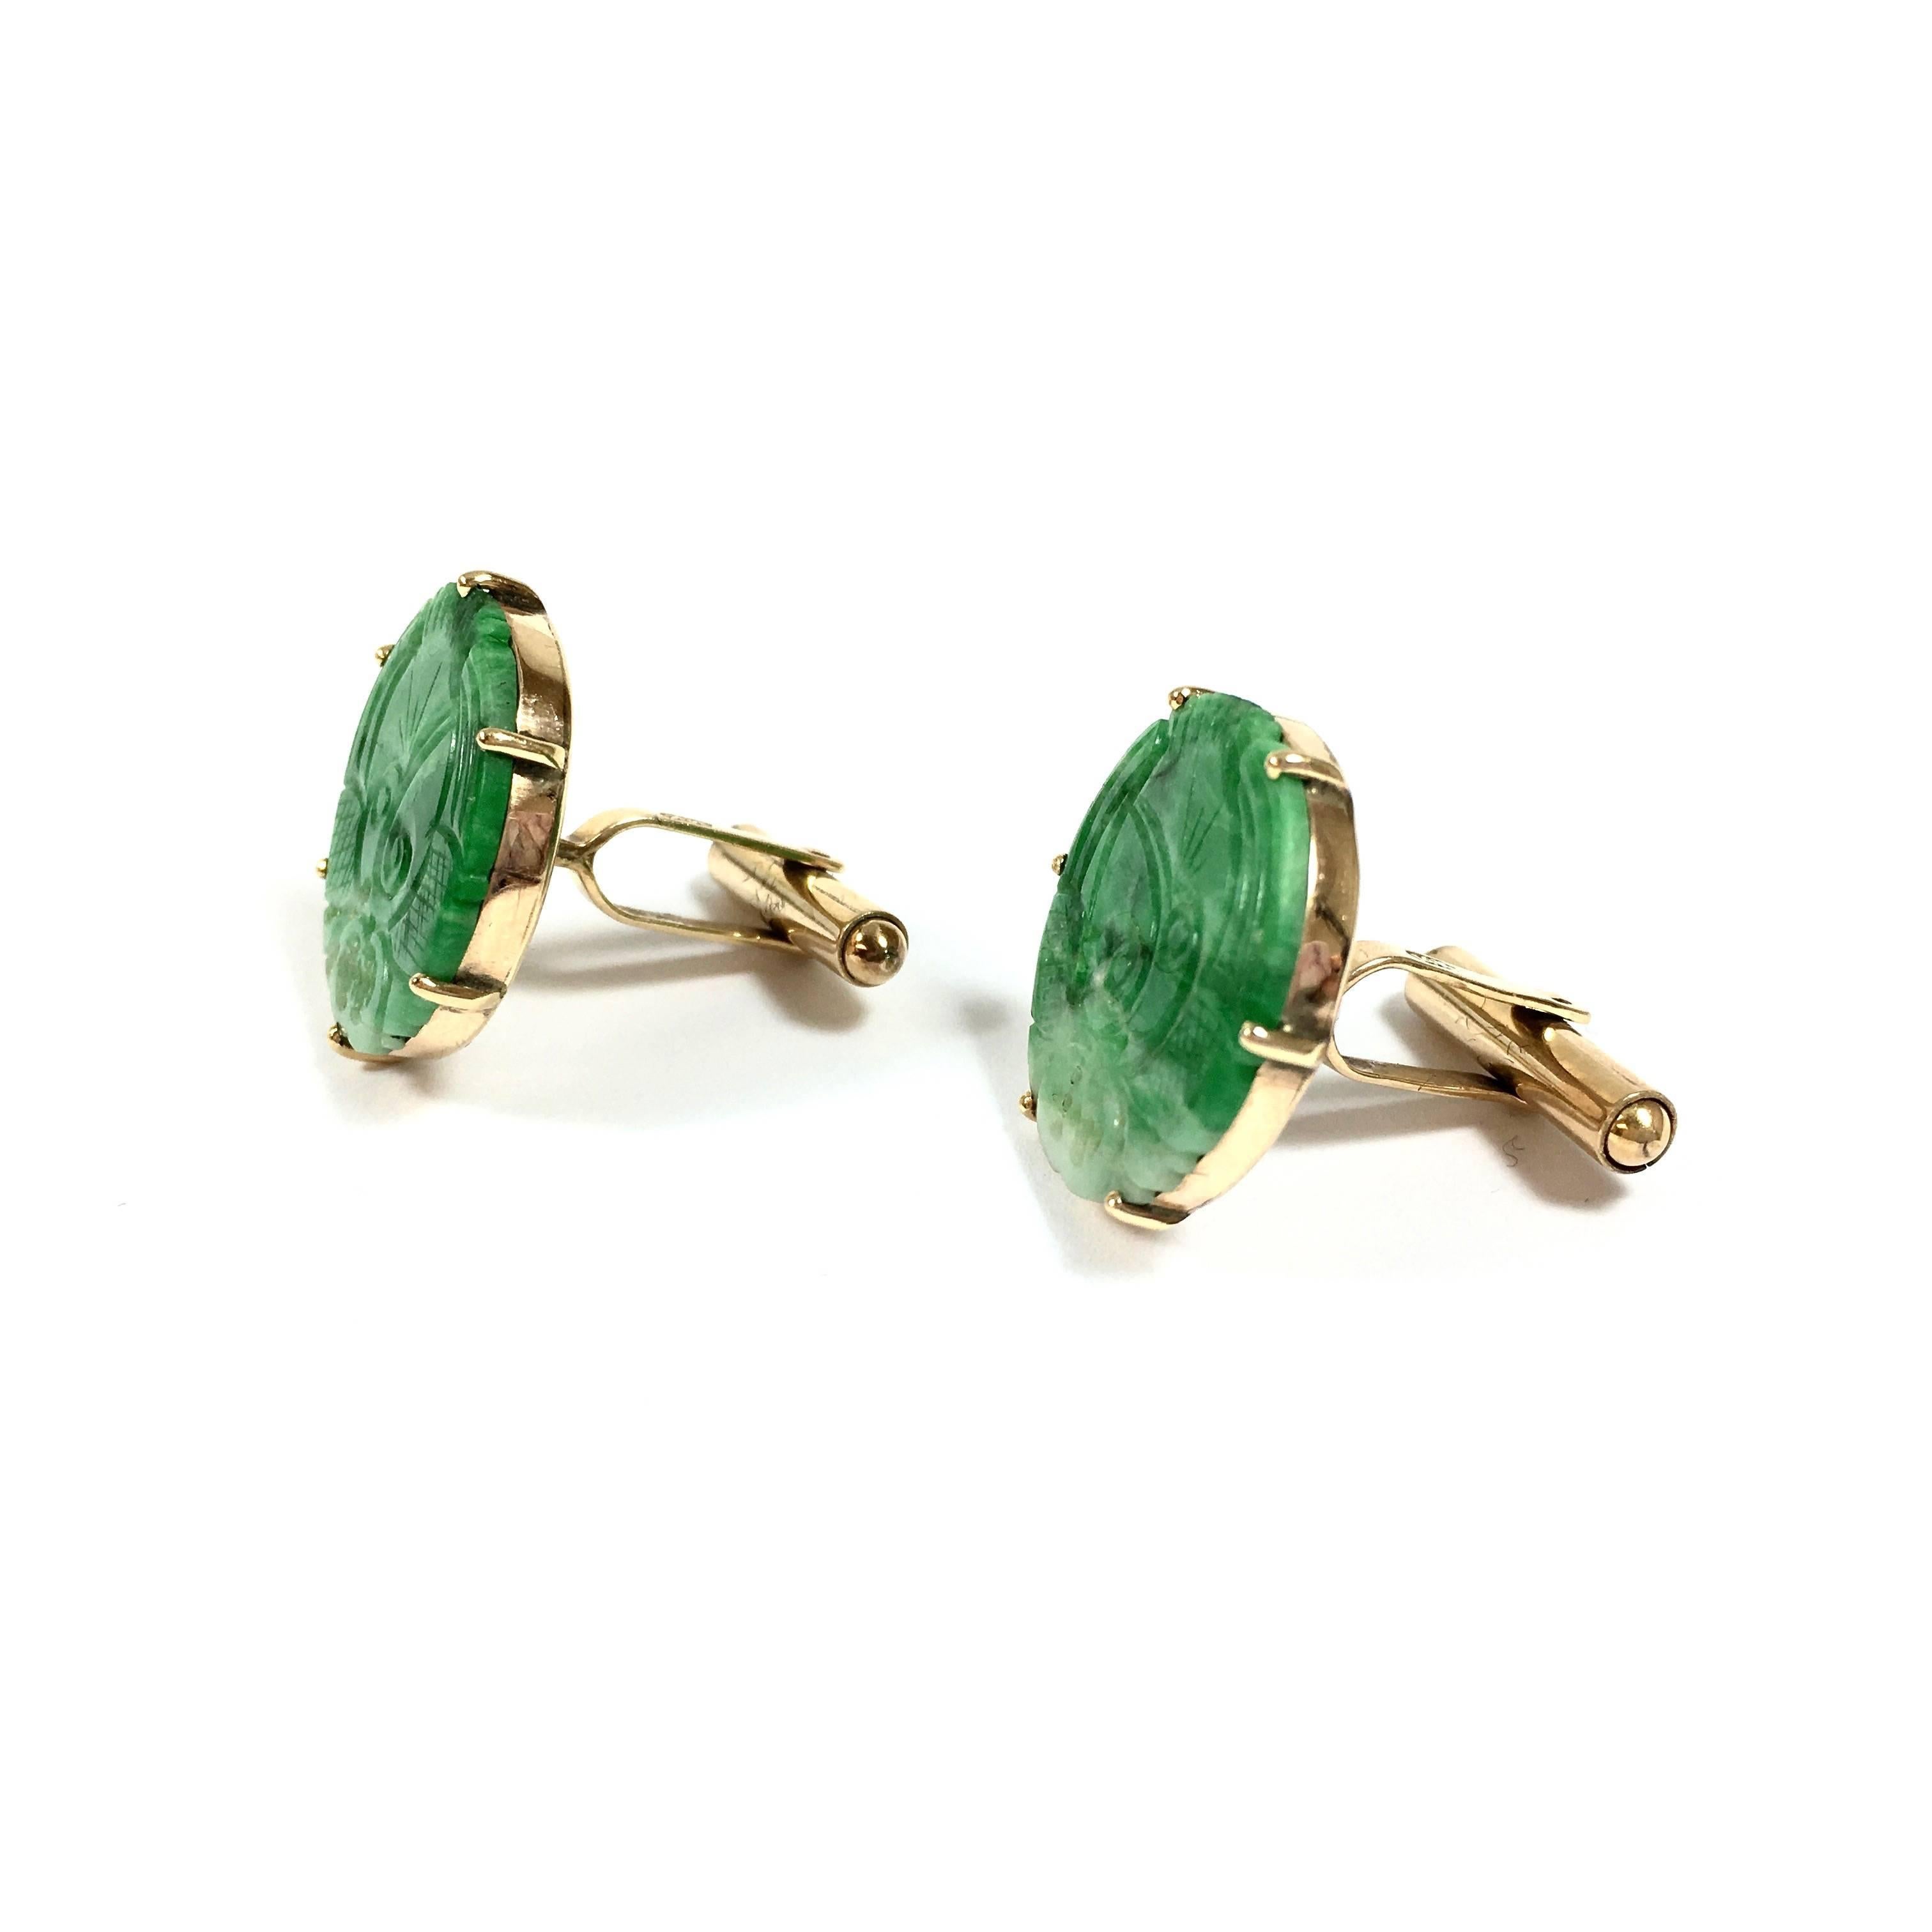 Crafted from 14K yellow gold, each cufflink features a 21 mm round hand carved  natural jade with  bird motif. 
Weight: 11.3 grams